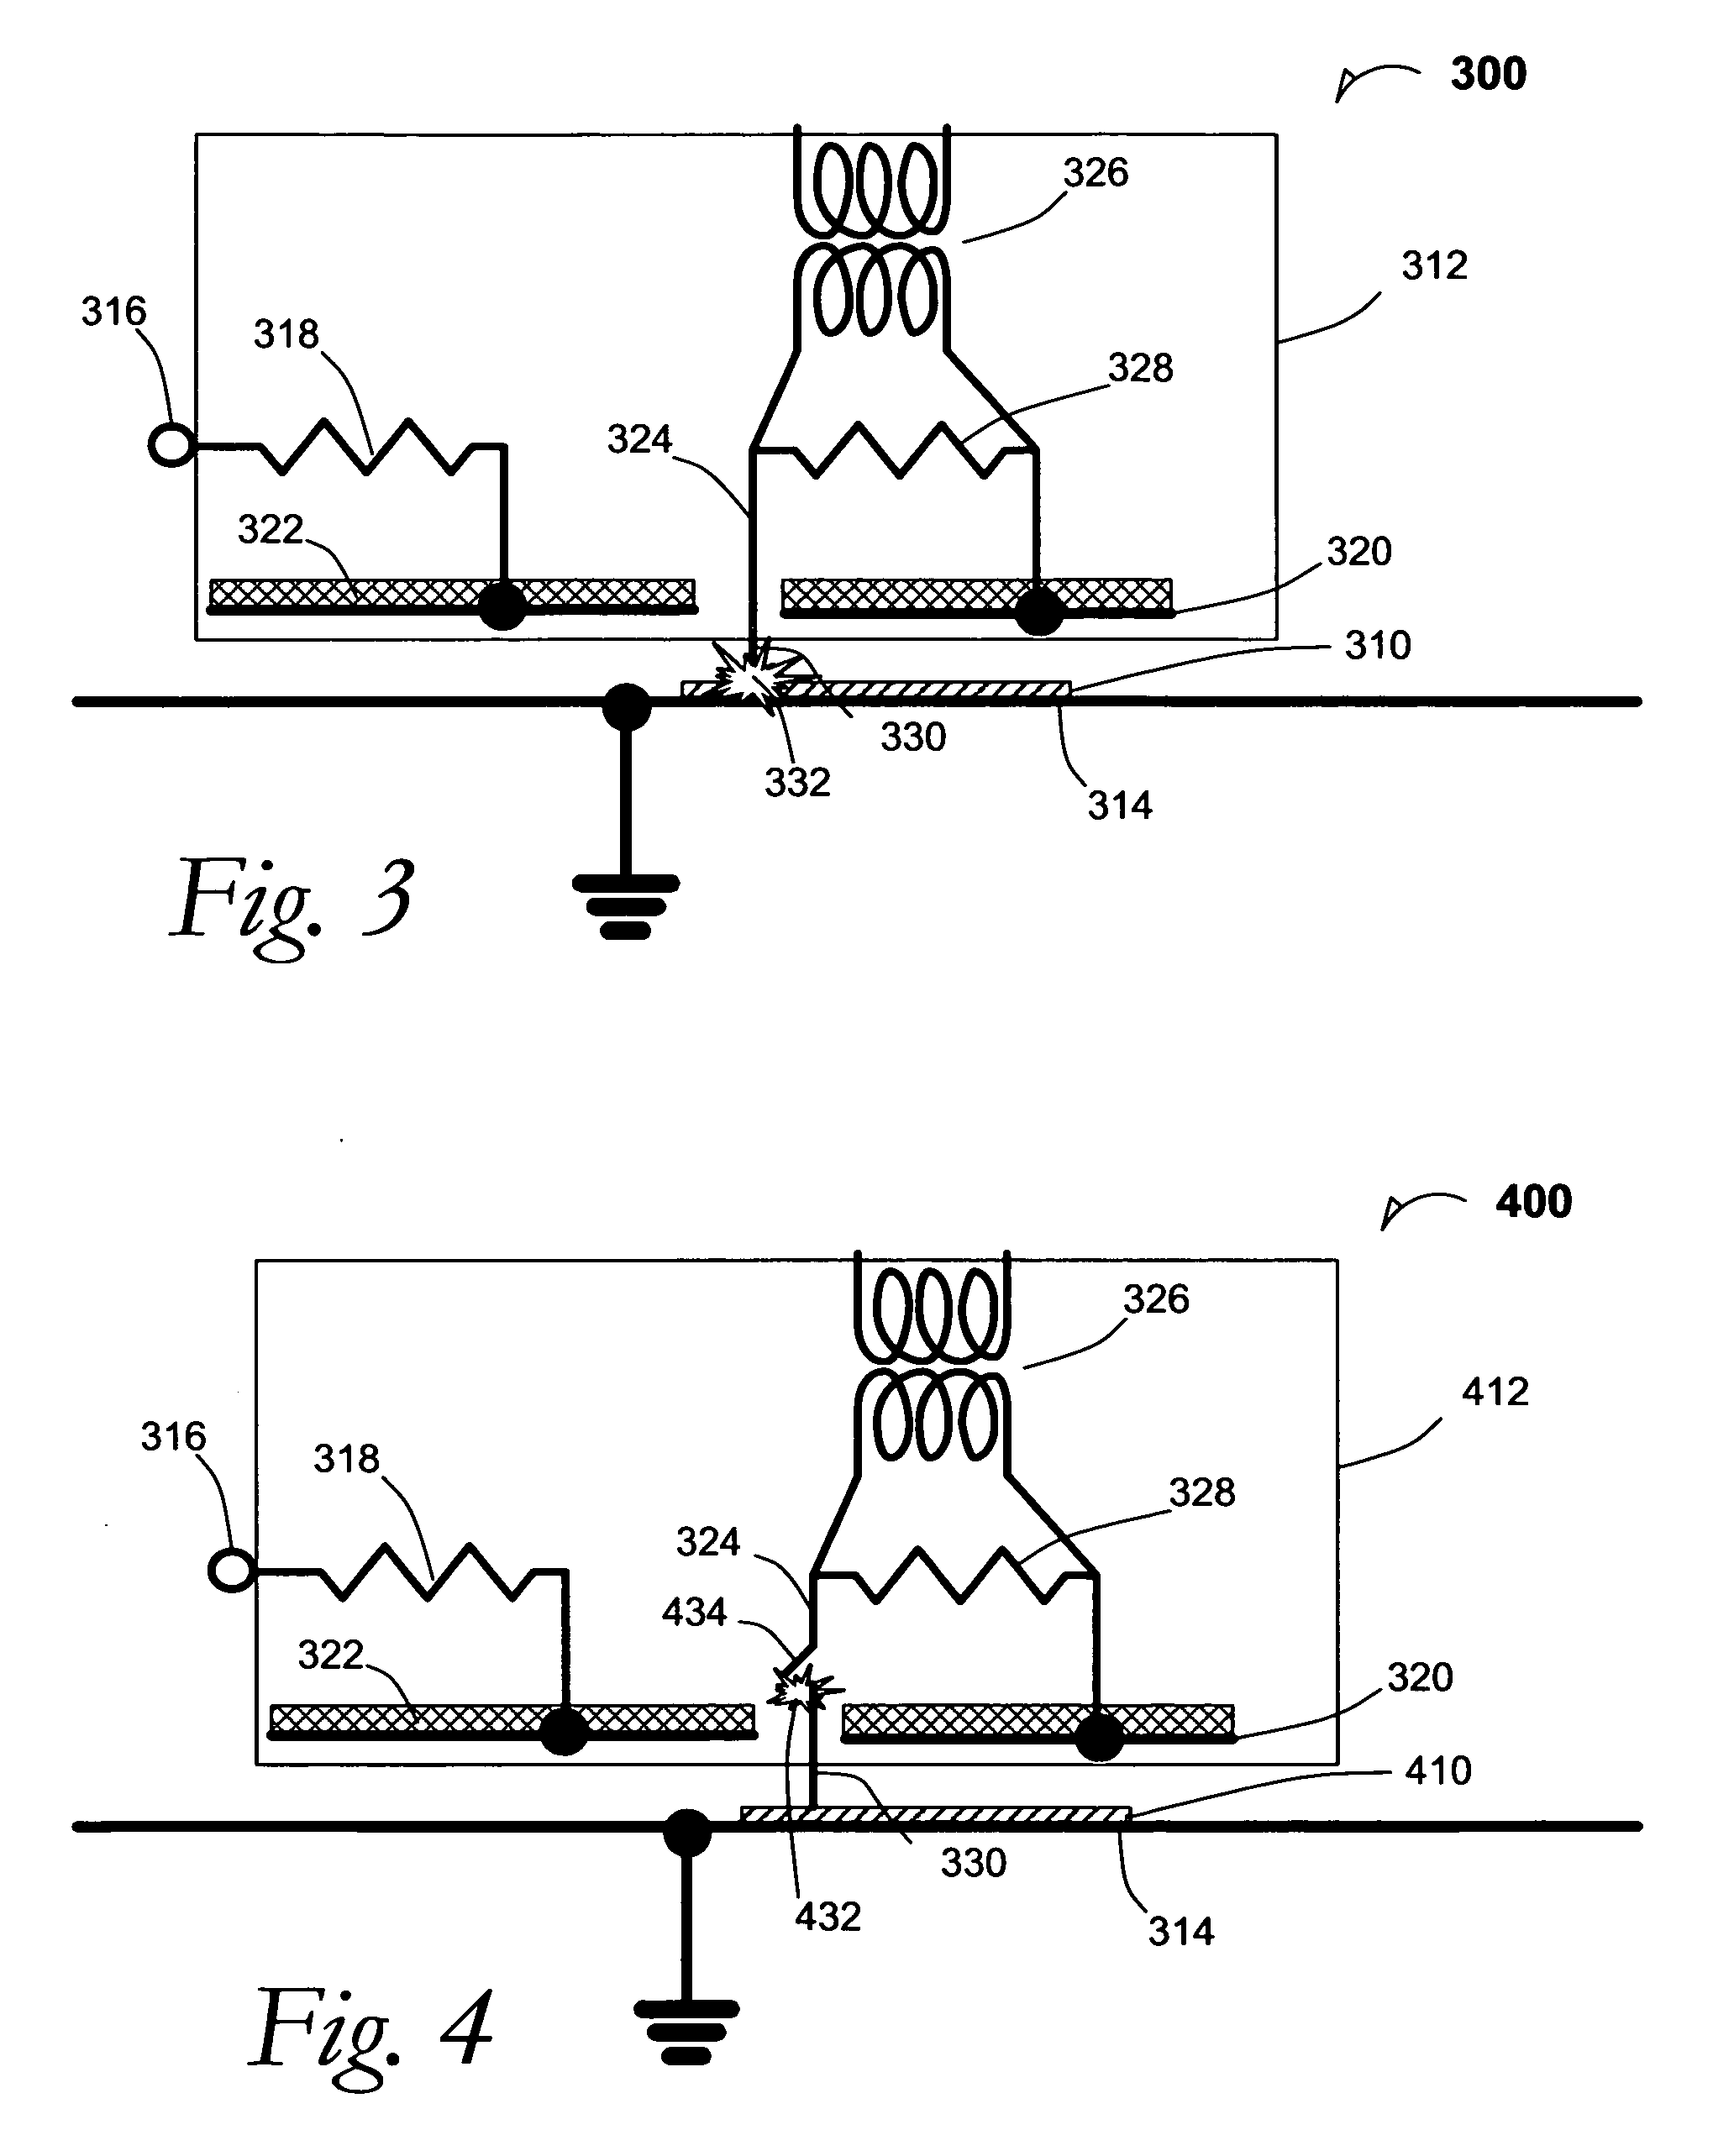 Water-level charged device model for electrostatic discharge test methods, and apparatus using same